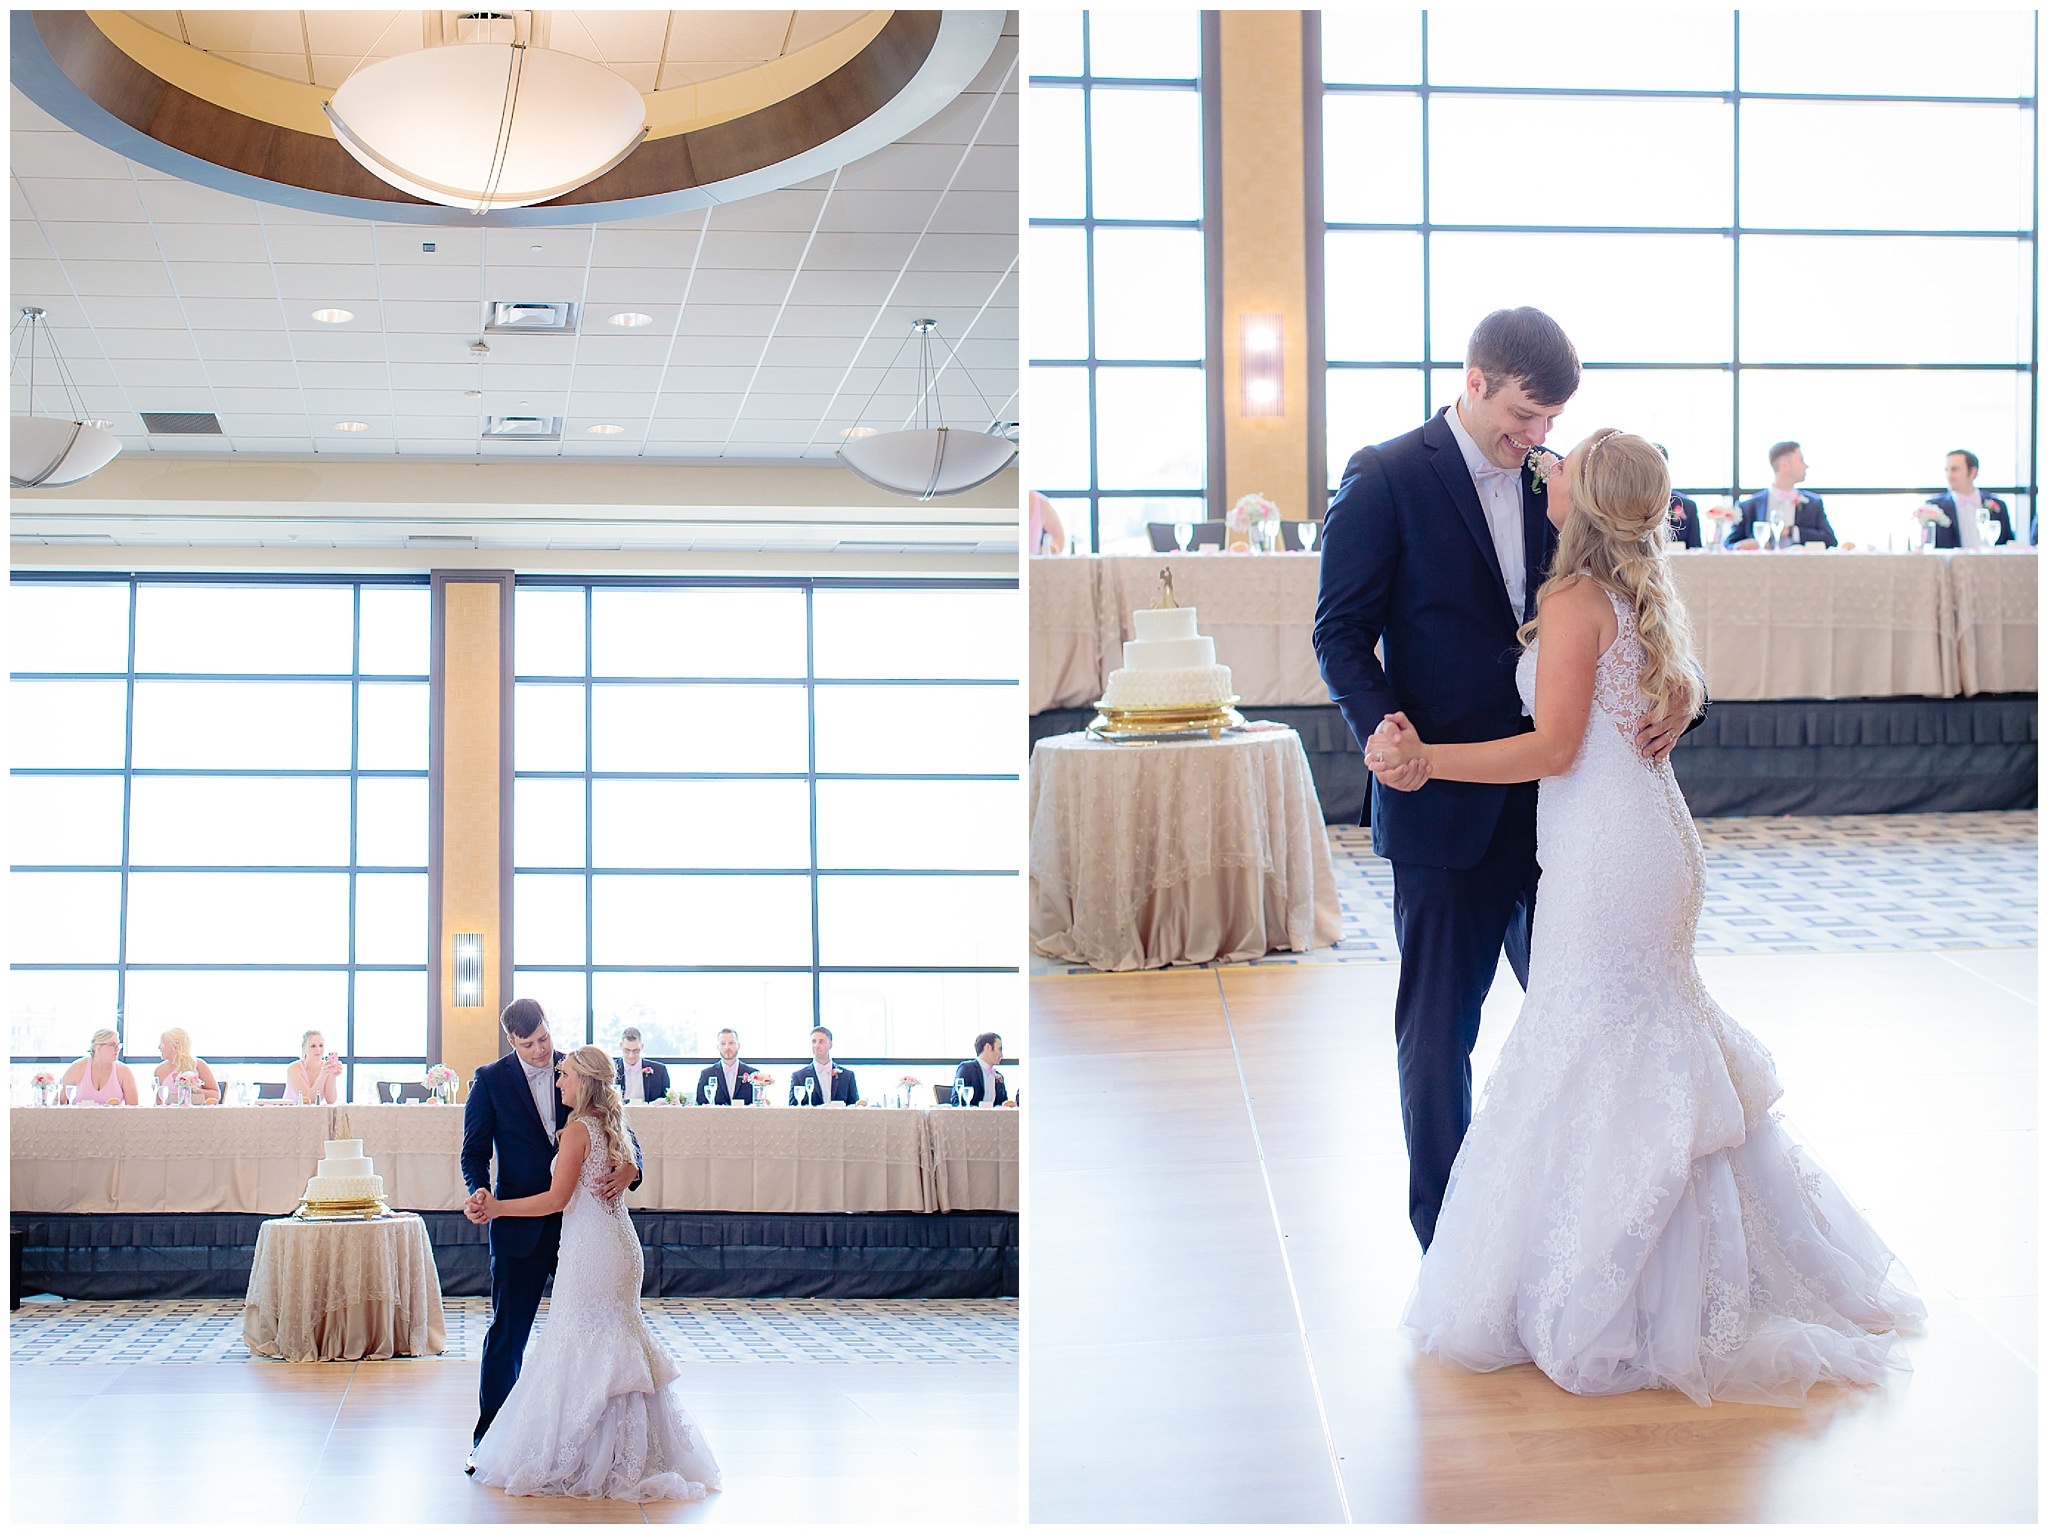 Bride & groom's first dance at a Duquesne University wedding reception